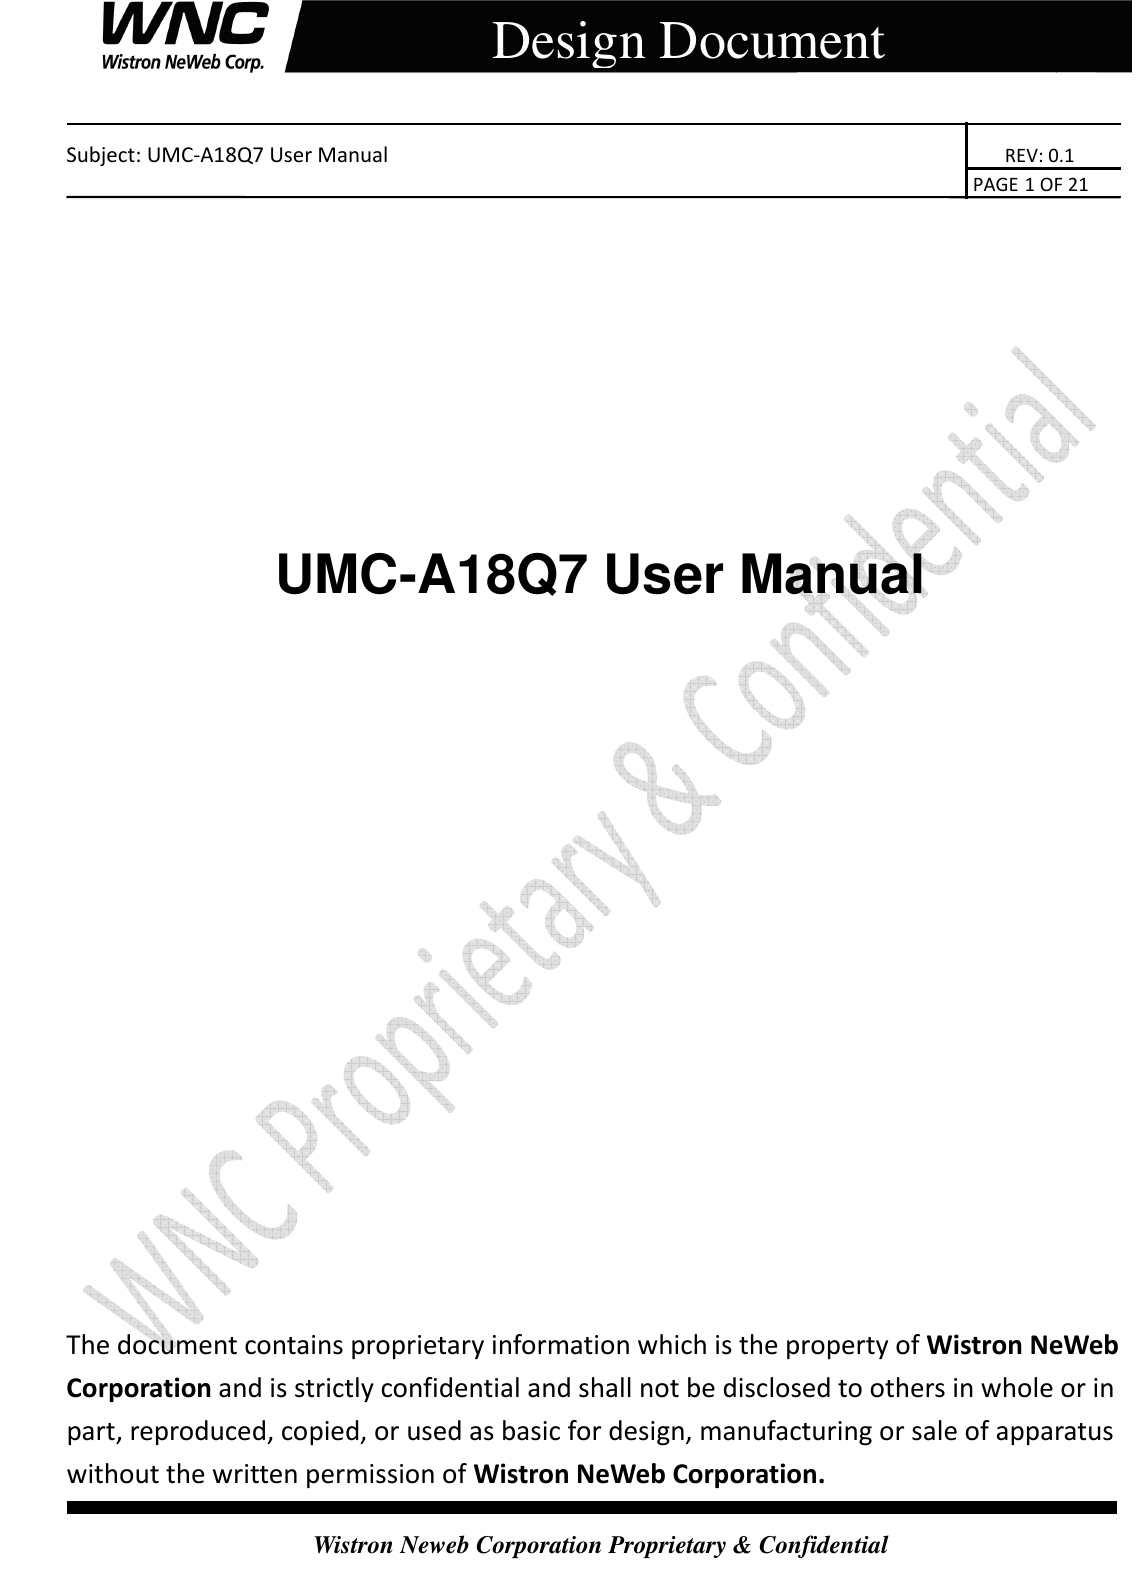    Subject: UMC-A18Q7 User Manual                                                                       REV: 0.1                                                                                                                                                                               PAGE 1 OF 21  Wistron Neweb Corporation Proprietary &amp; Confidential     Design Document          UMC-A18Q7 User Manual                    The document contains proprietary information which is the property of Wistron NeWeb Corporation and is strictly confidential and shall not be disclosed to others in whole or in part, reproduced, copied, or used as basic for design, manufacturing or sale of apparatus without the written permission of Wistron NeWeb Corporation. 